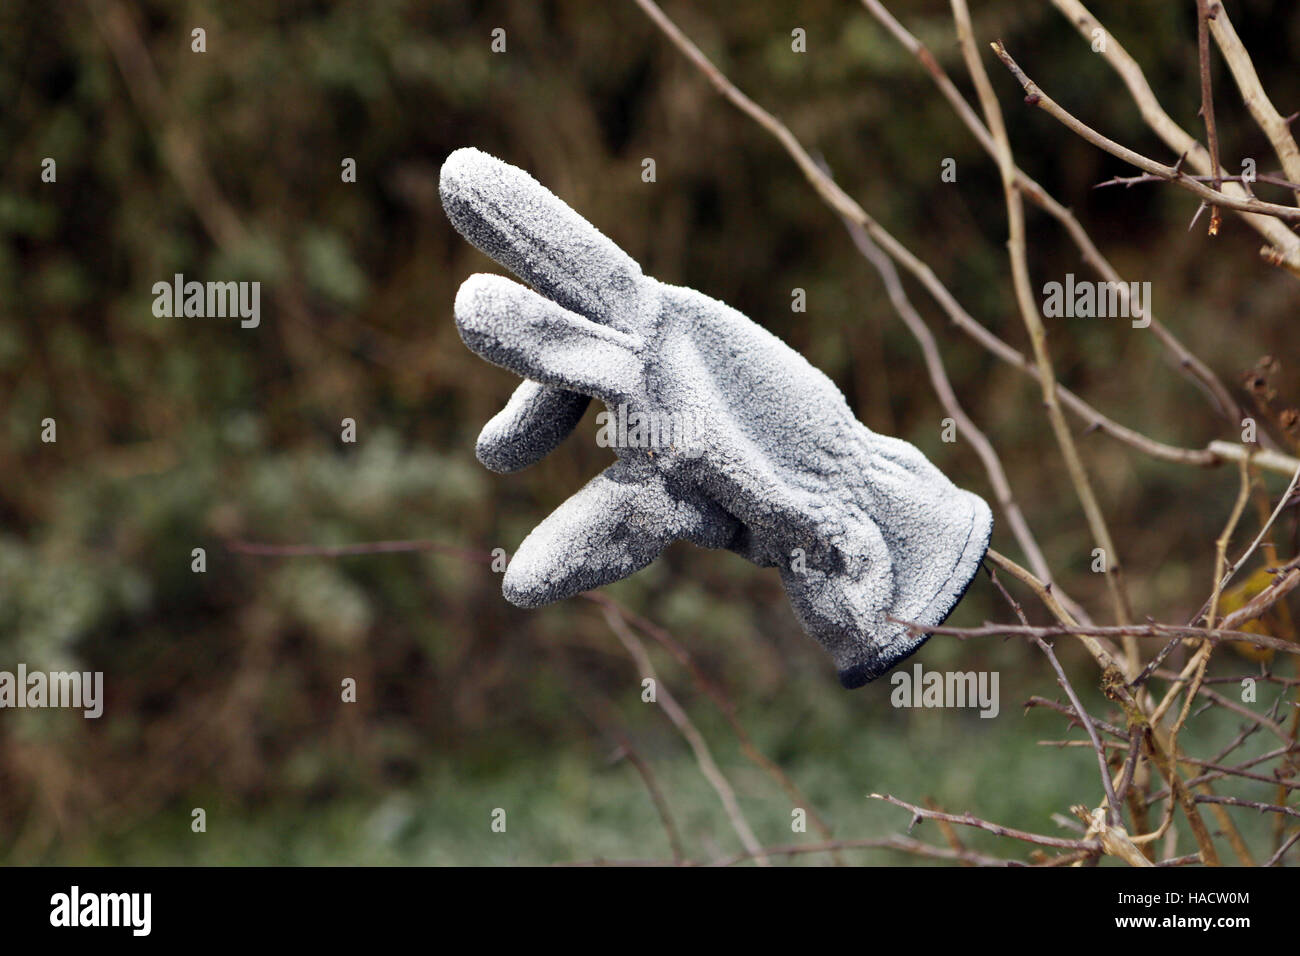 Frost covers a glove in a field near Kingsclere, Hampshire, after one of England's coldest nights of the autumn so far this year. Stock Photo